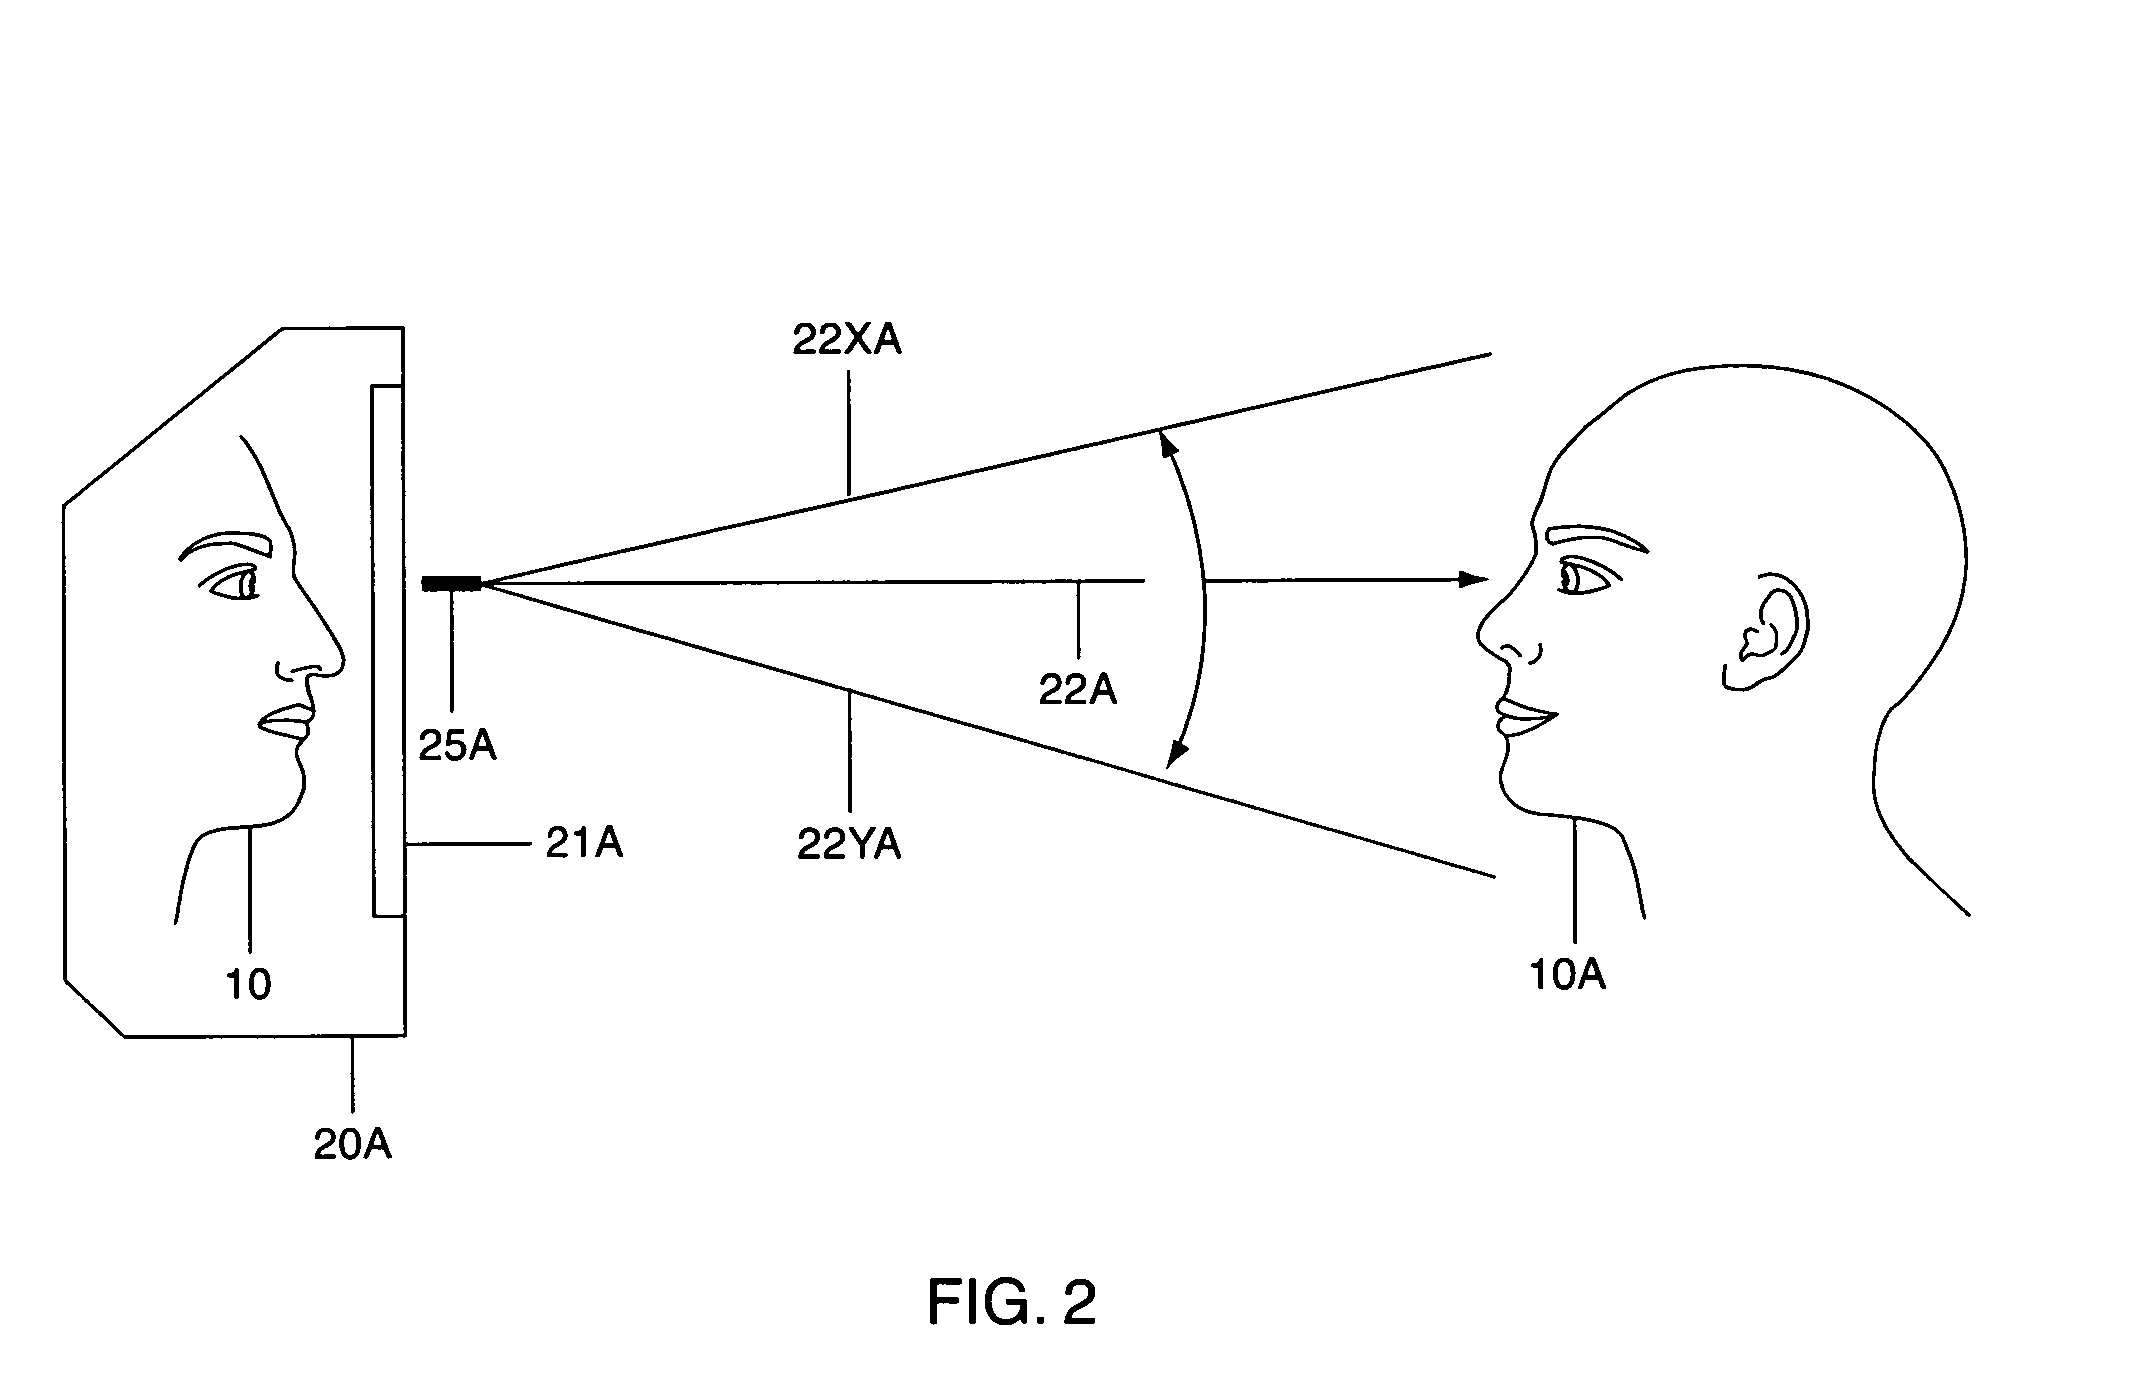 Video conferencing device and method